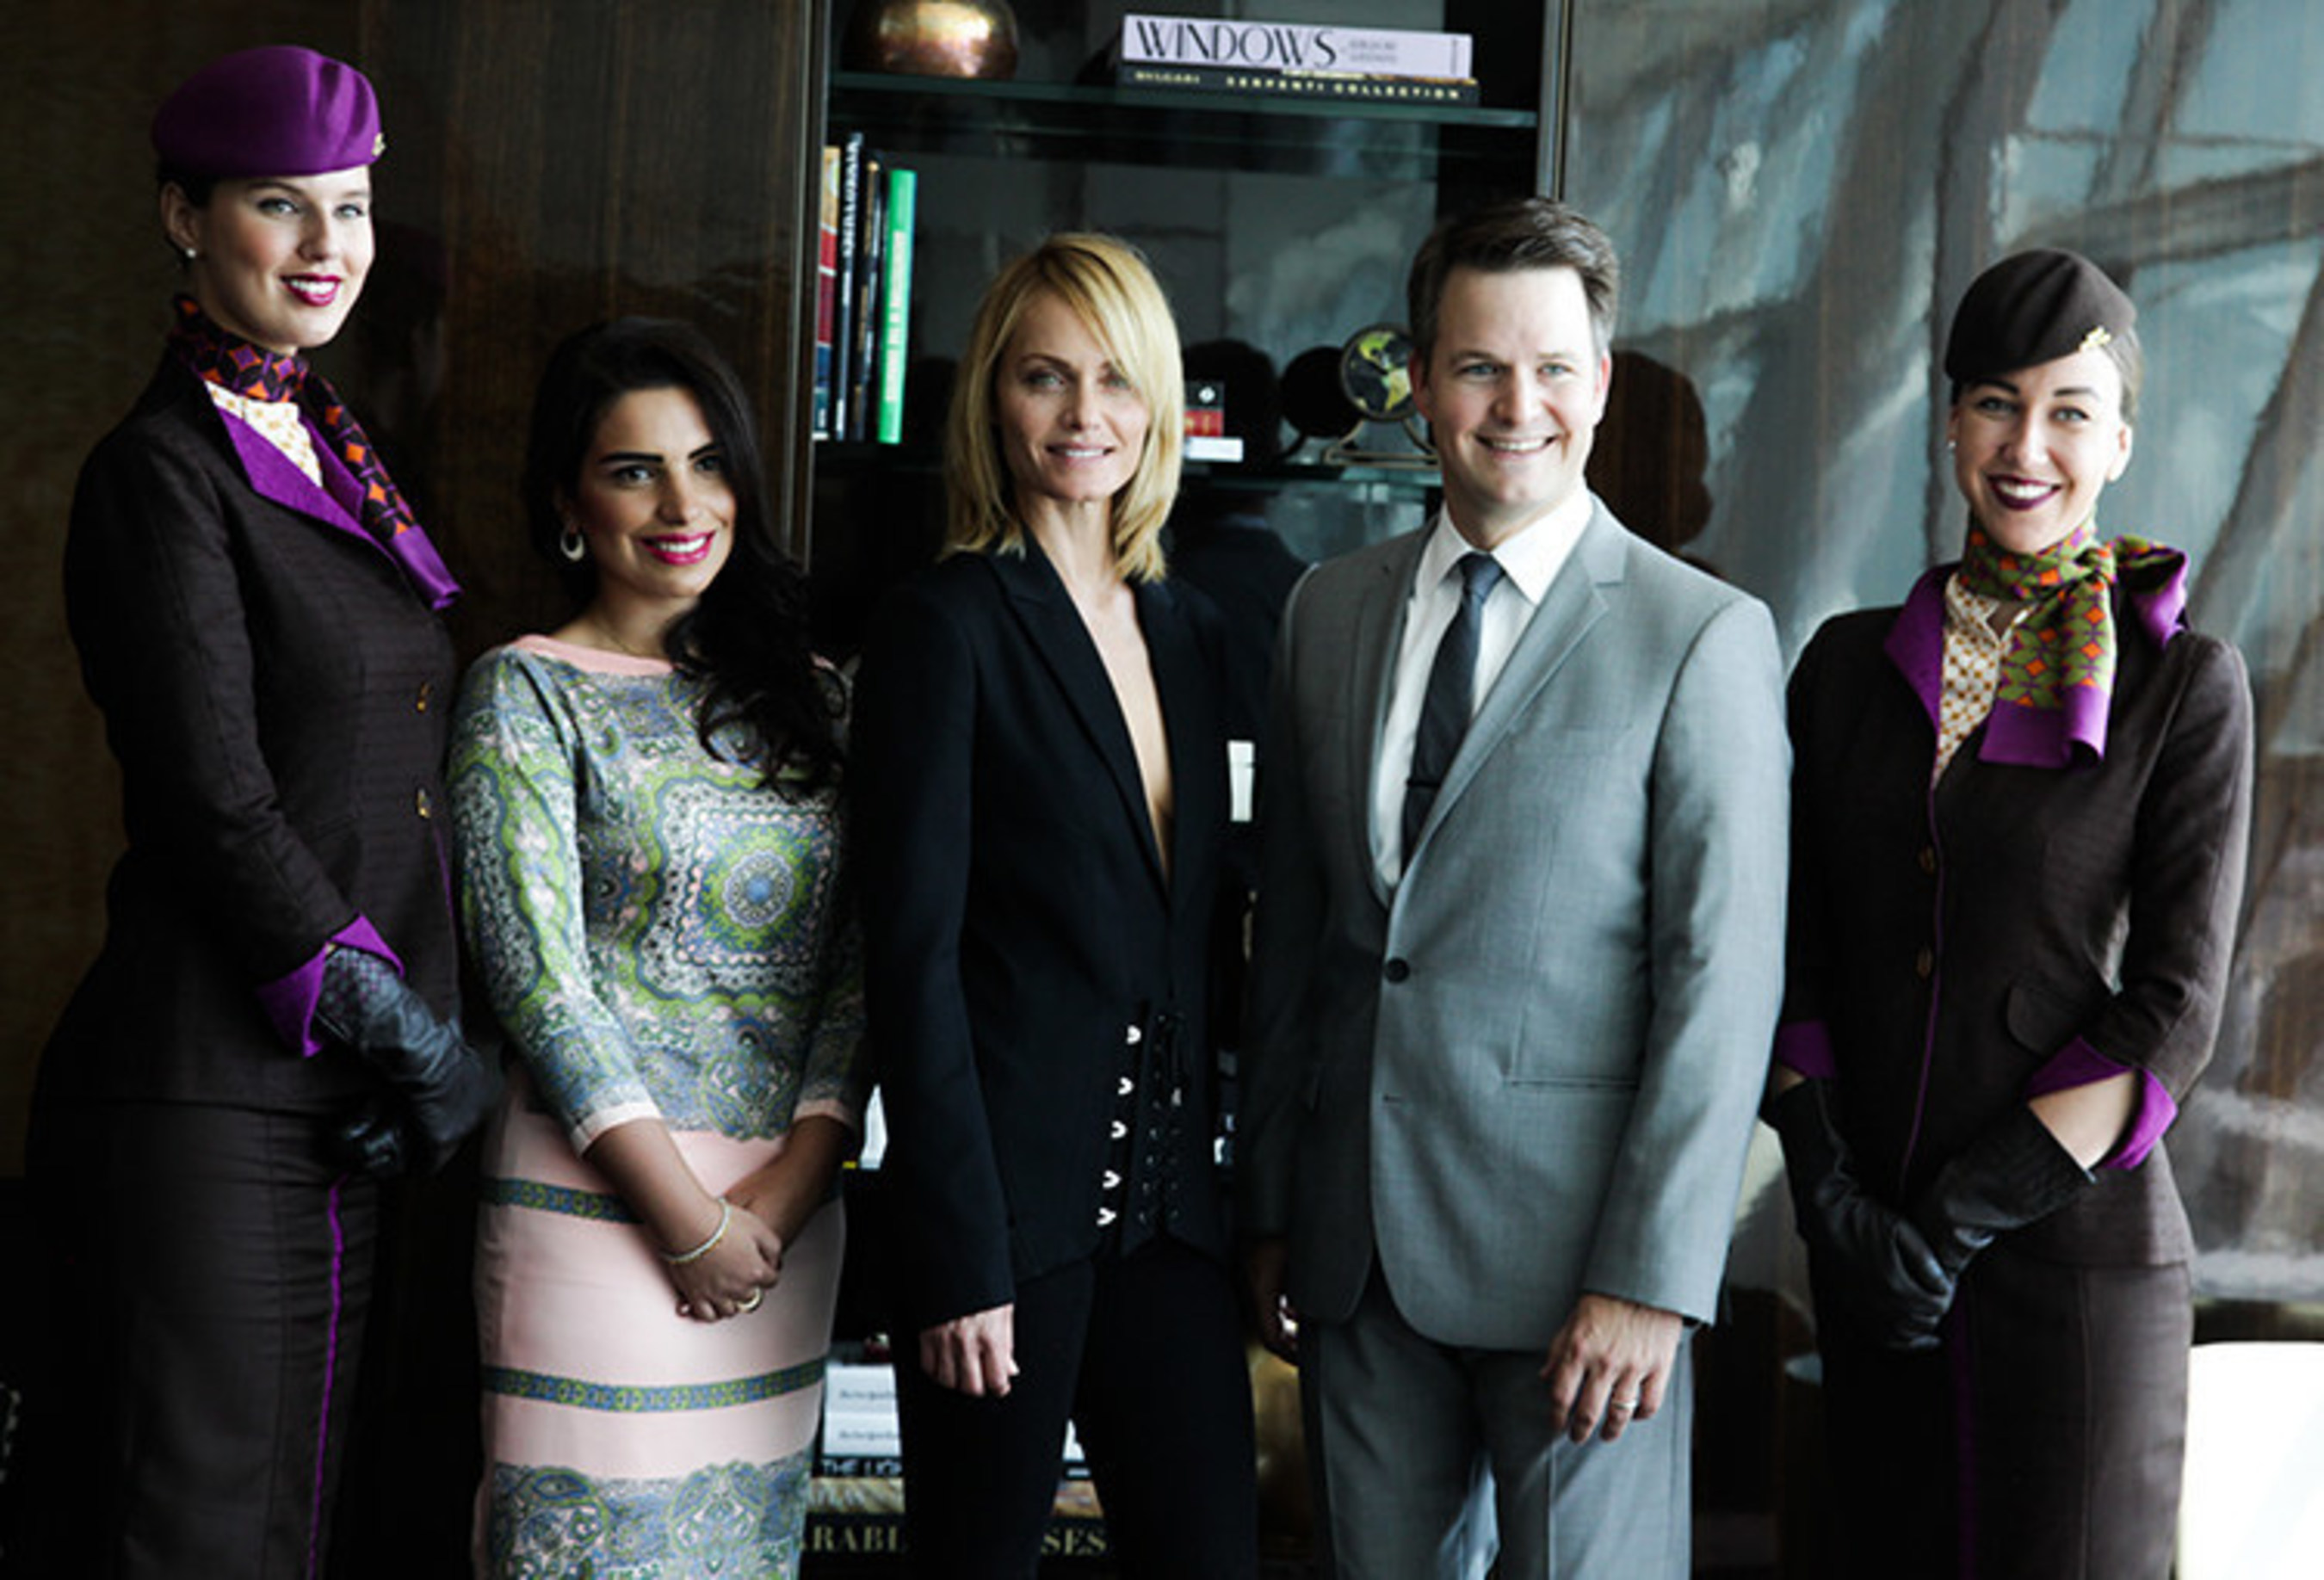 (From left to right, flanked by Etihad Airways crew) Amina Taher, Head of Corporate Communications - Etihad Airways; Supermodel Amber Valletta; and Patrick Pierce, Vice President of Sponsorships - Etihad Airways; and Supermodel Amber Valletta celebrate the launch of the partnership between Etihad Airways and Jimmy Choo for New York Fashion Week at the Etihad Airways First & Business Class Lounge at JFK International Airport in New York City.